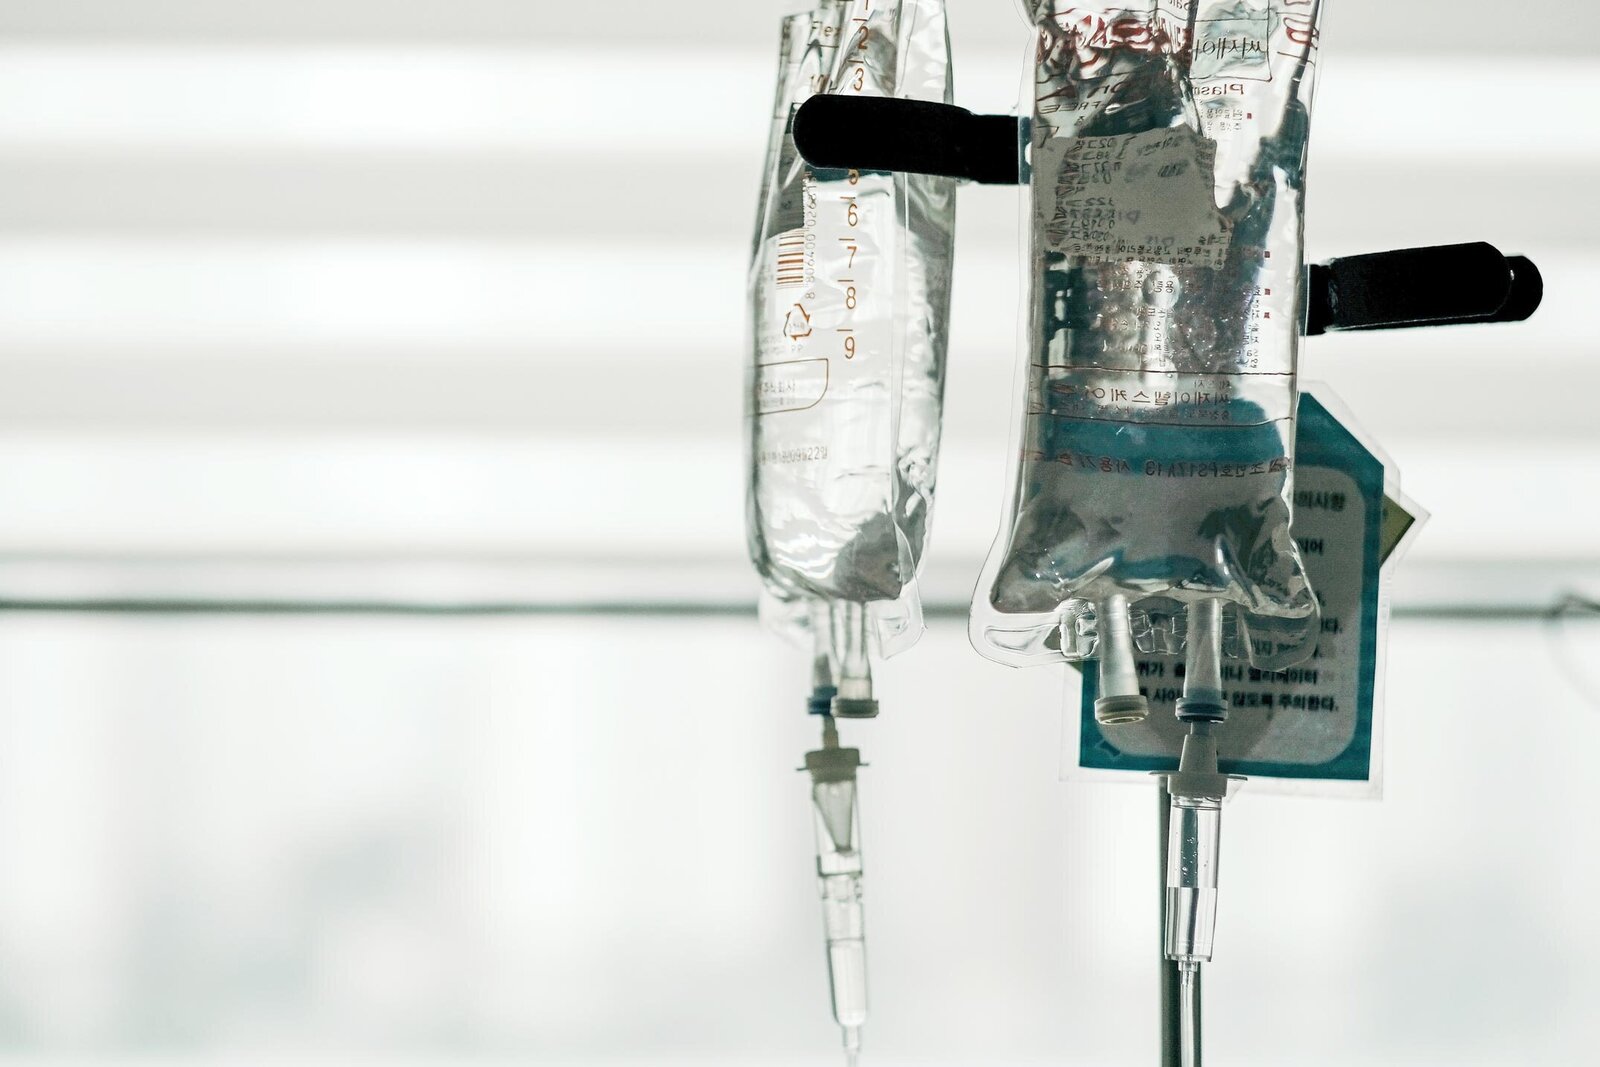 IV Bags Hanging on Pole, St. Pete Rejuvenate Ketamine Therapy